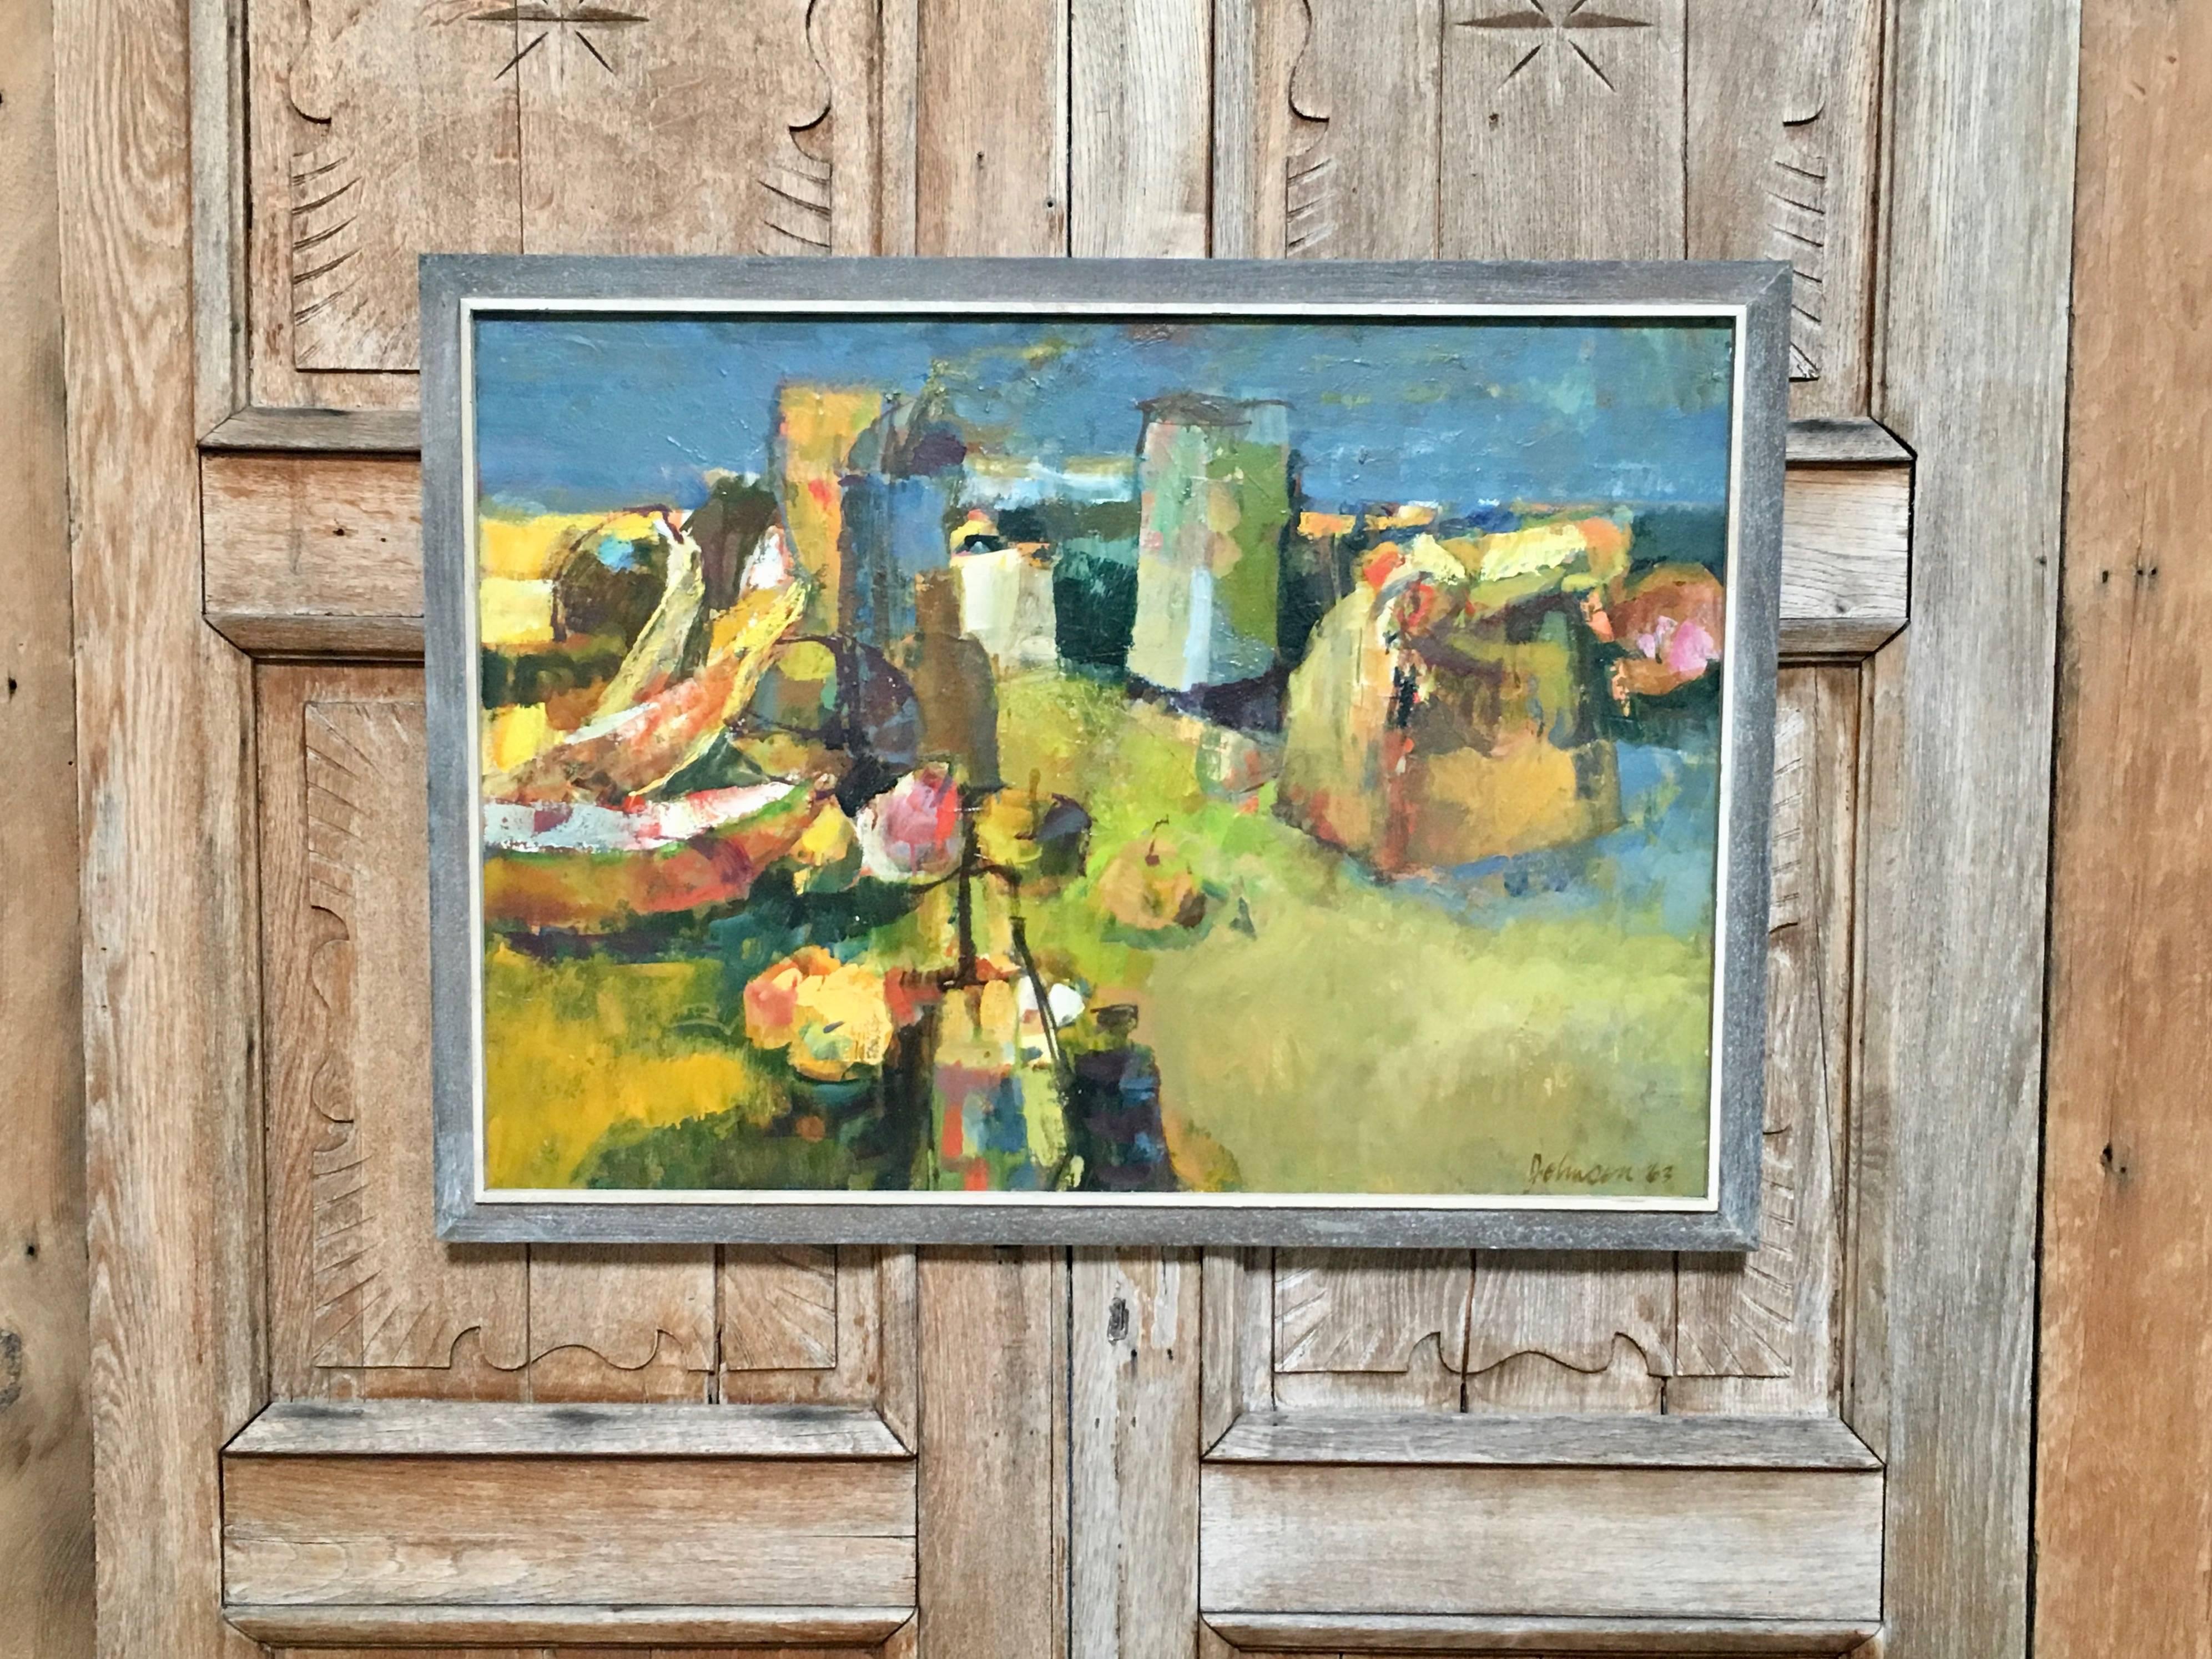 Nice cubist oil painting on army canvas with rustic frame dated 1963.